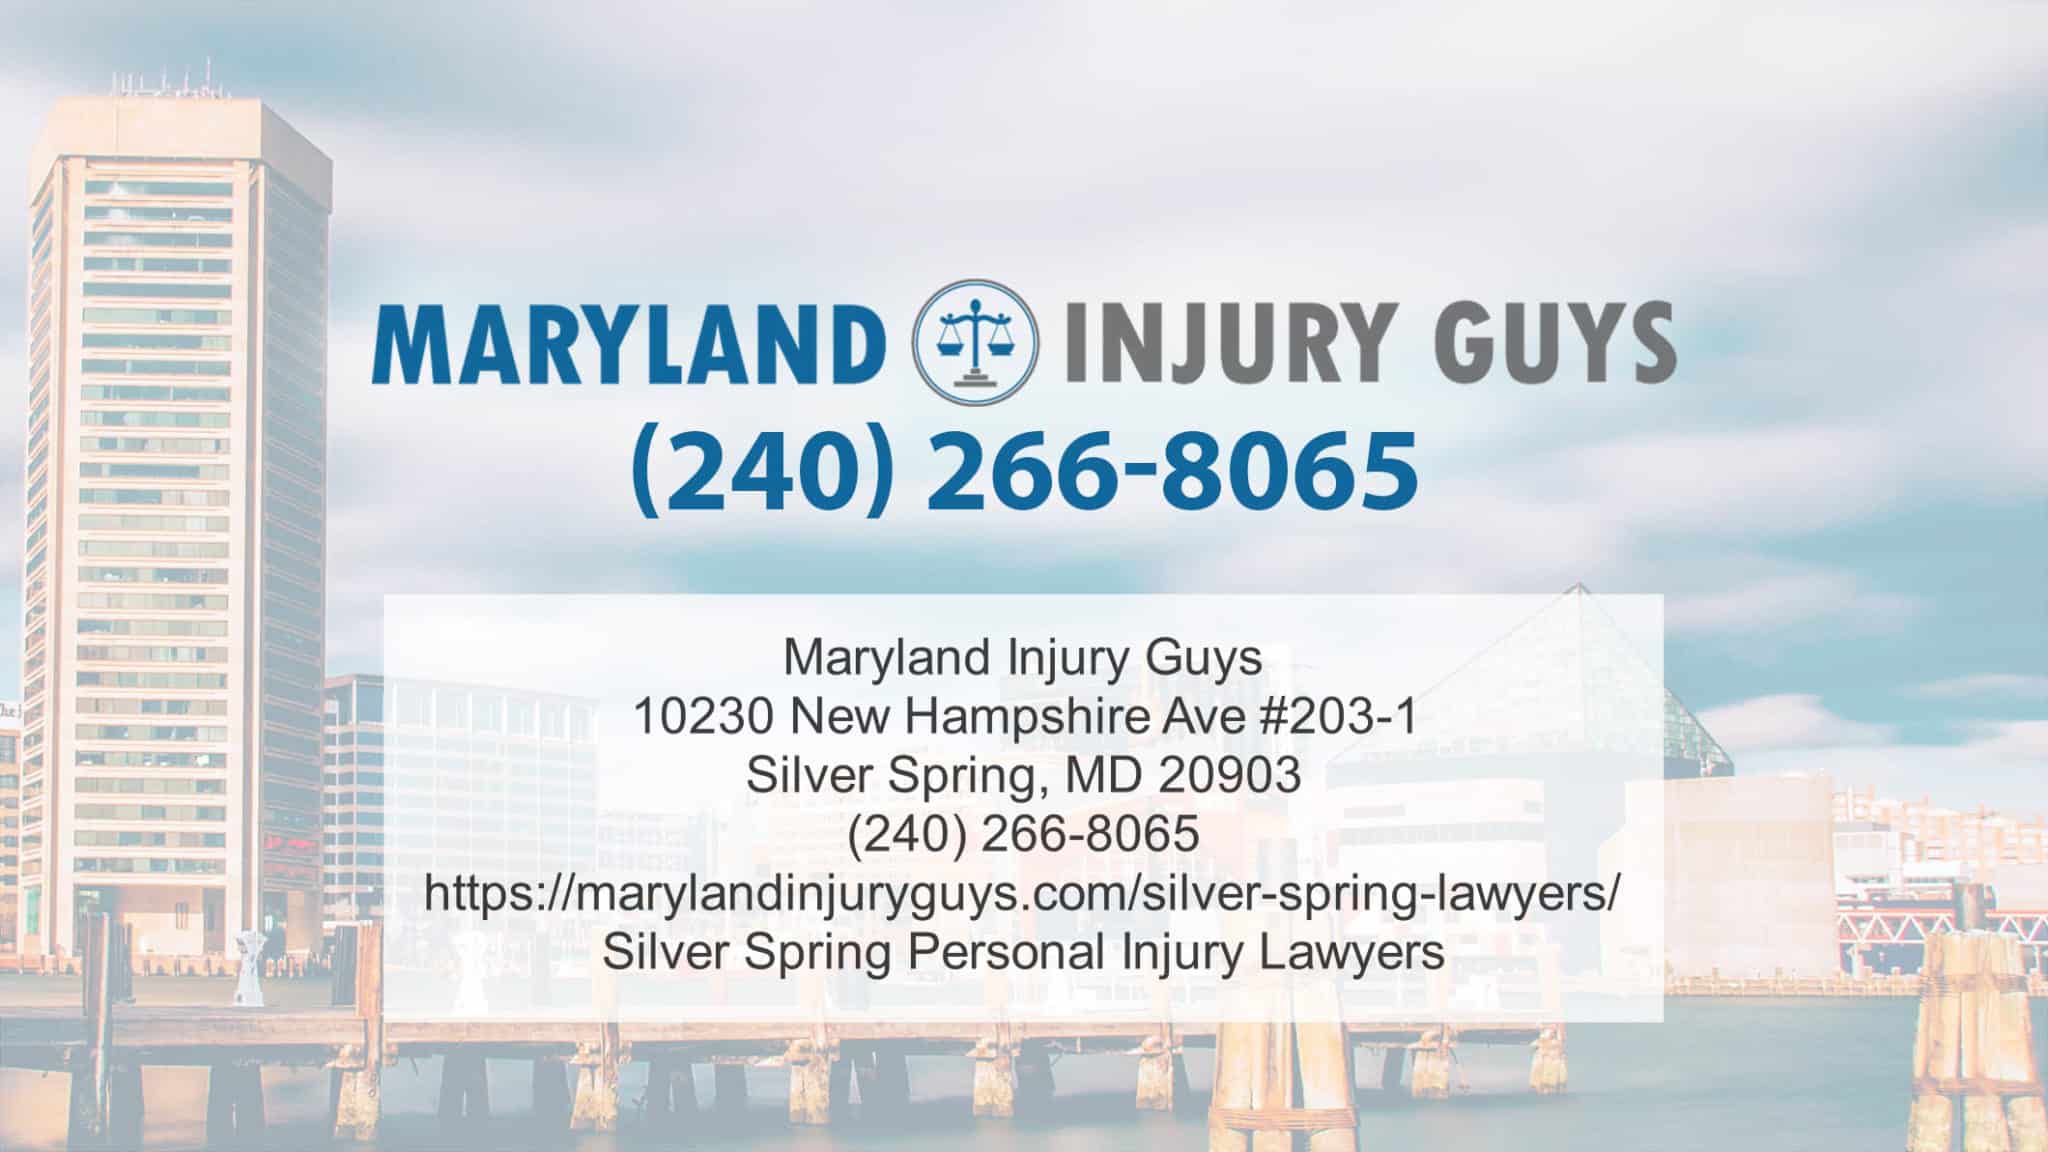 Top Baltimore Lawyers Have 24/7 Injury Helpline For Motorcycle Accident Victims